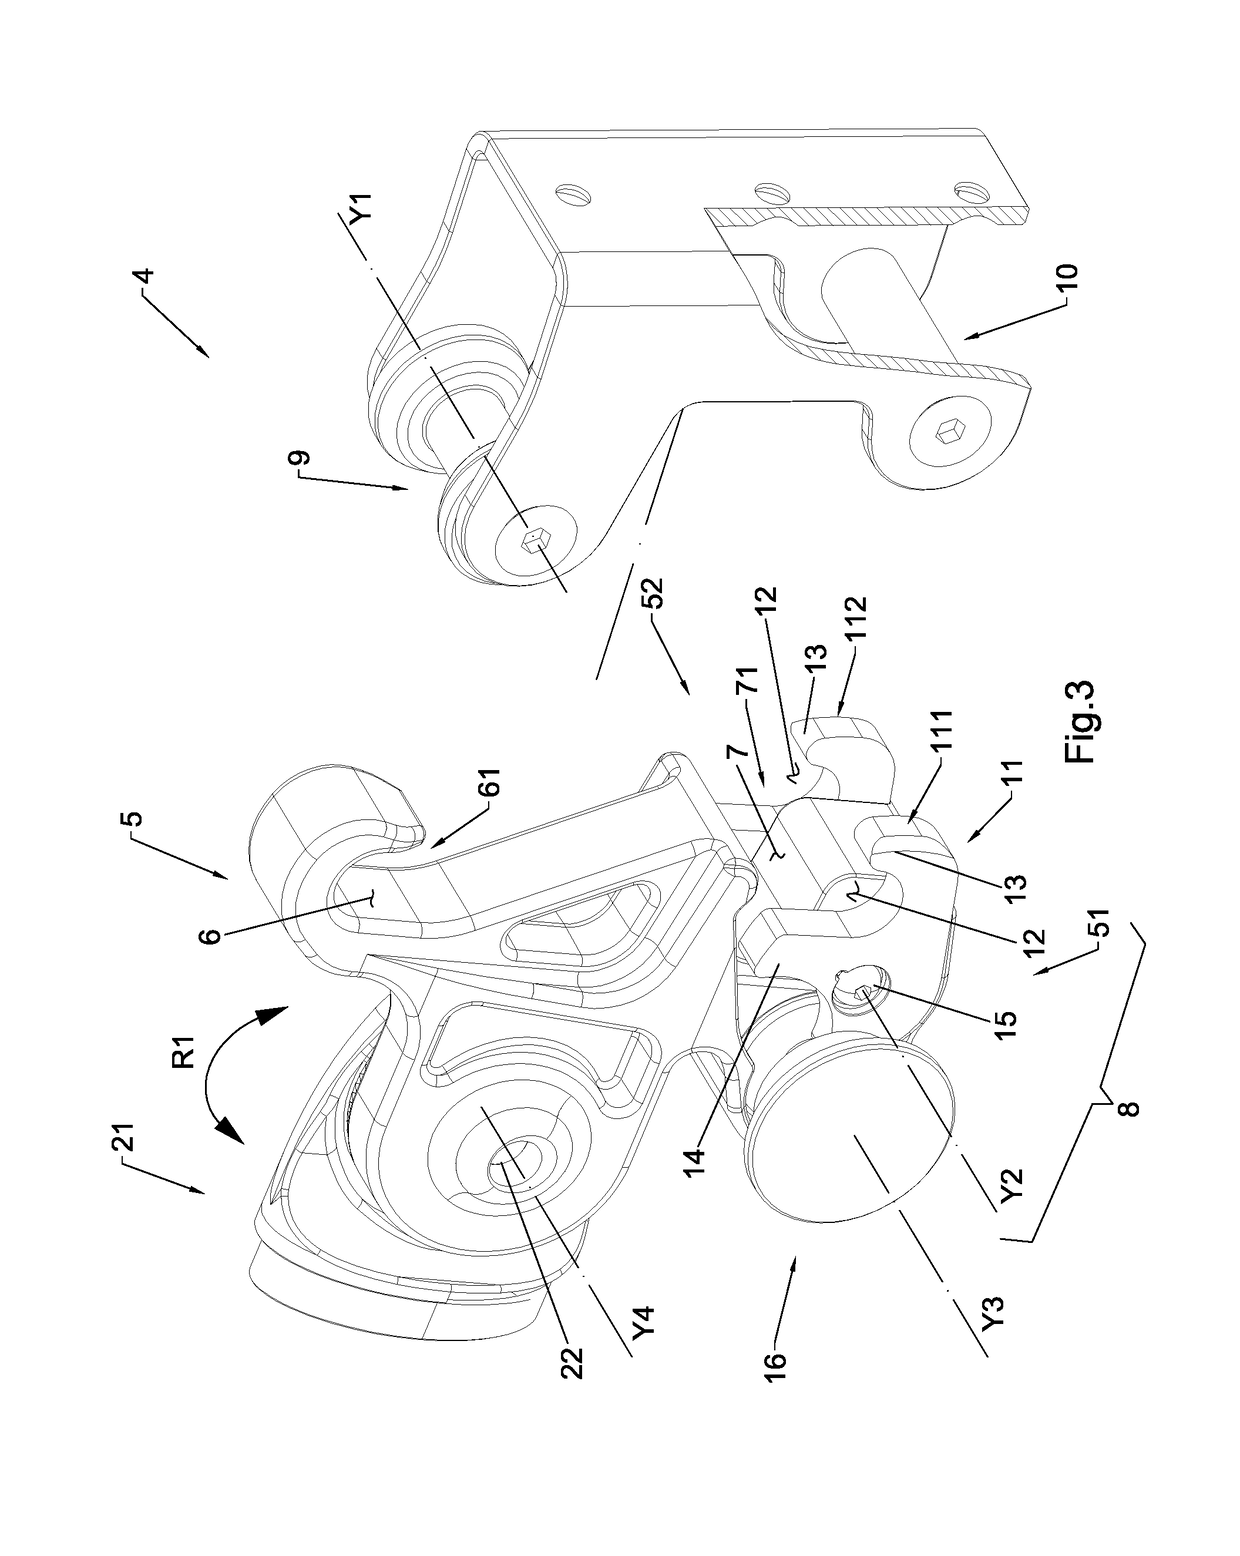 Connection assembly for coupling an auxiliary drive system to a wheelchair for disabled people